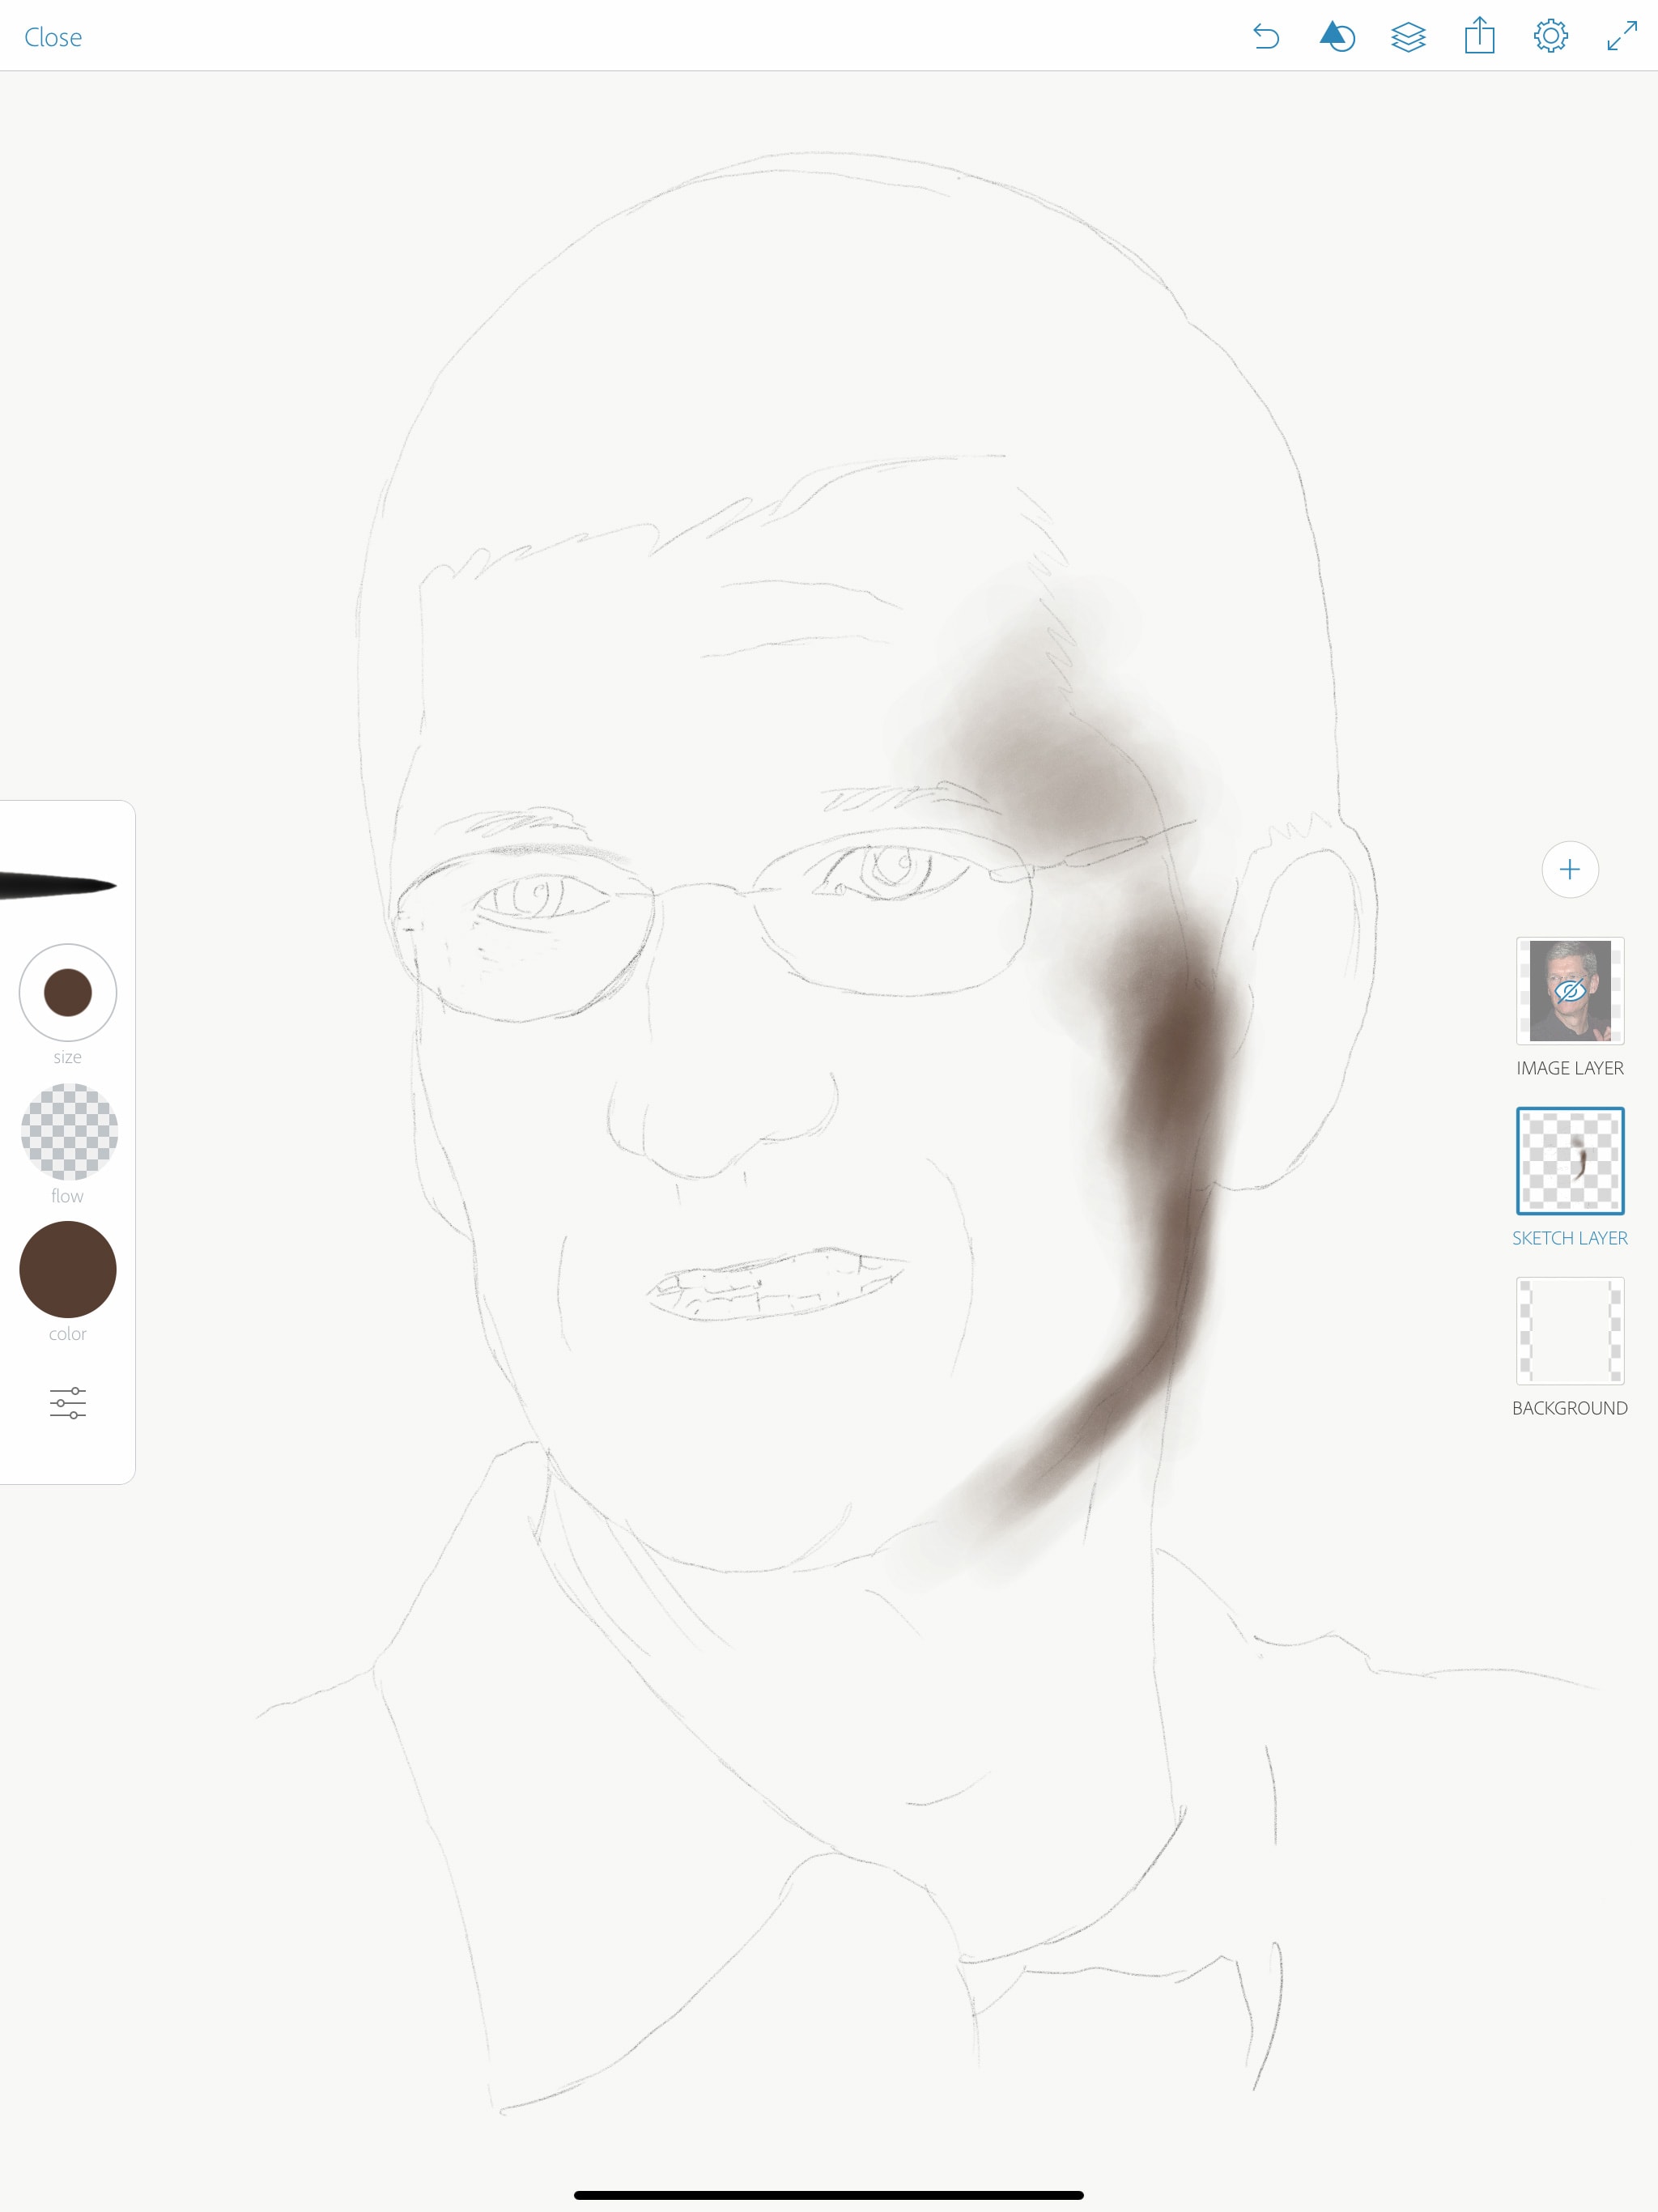 How to draw a portrait with Apple Pencil: Step 1: Trace an outline